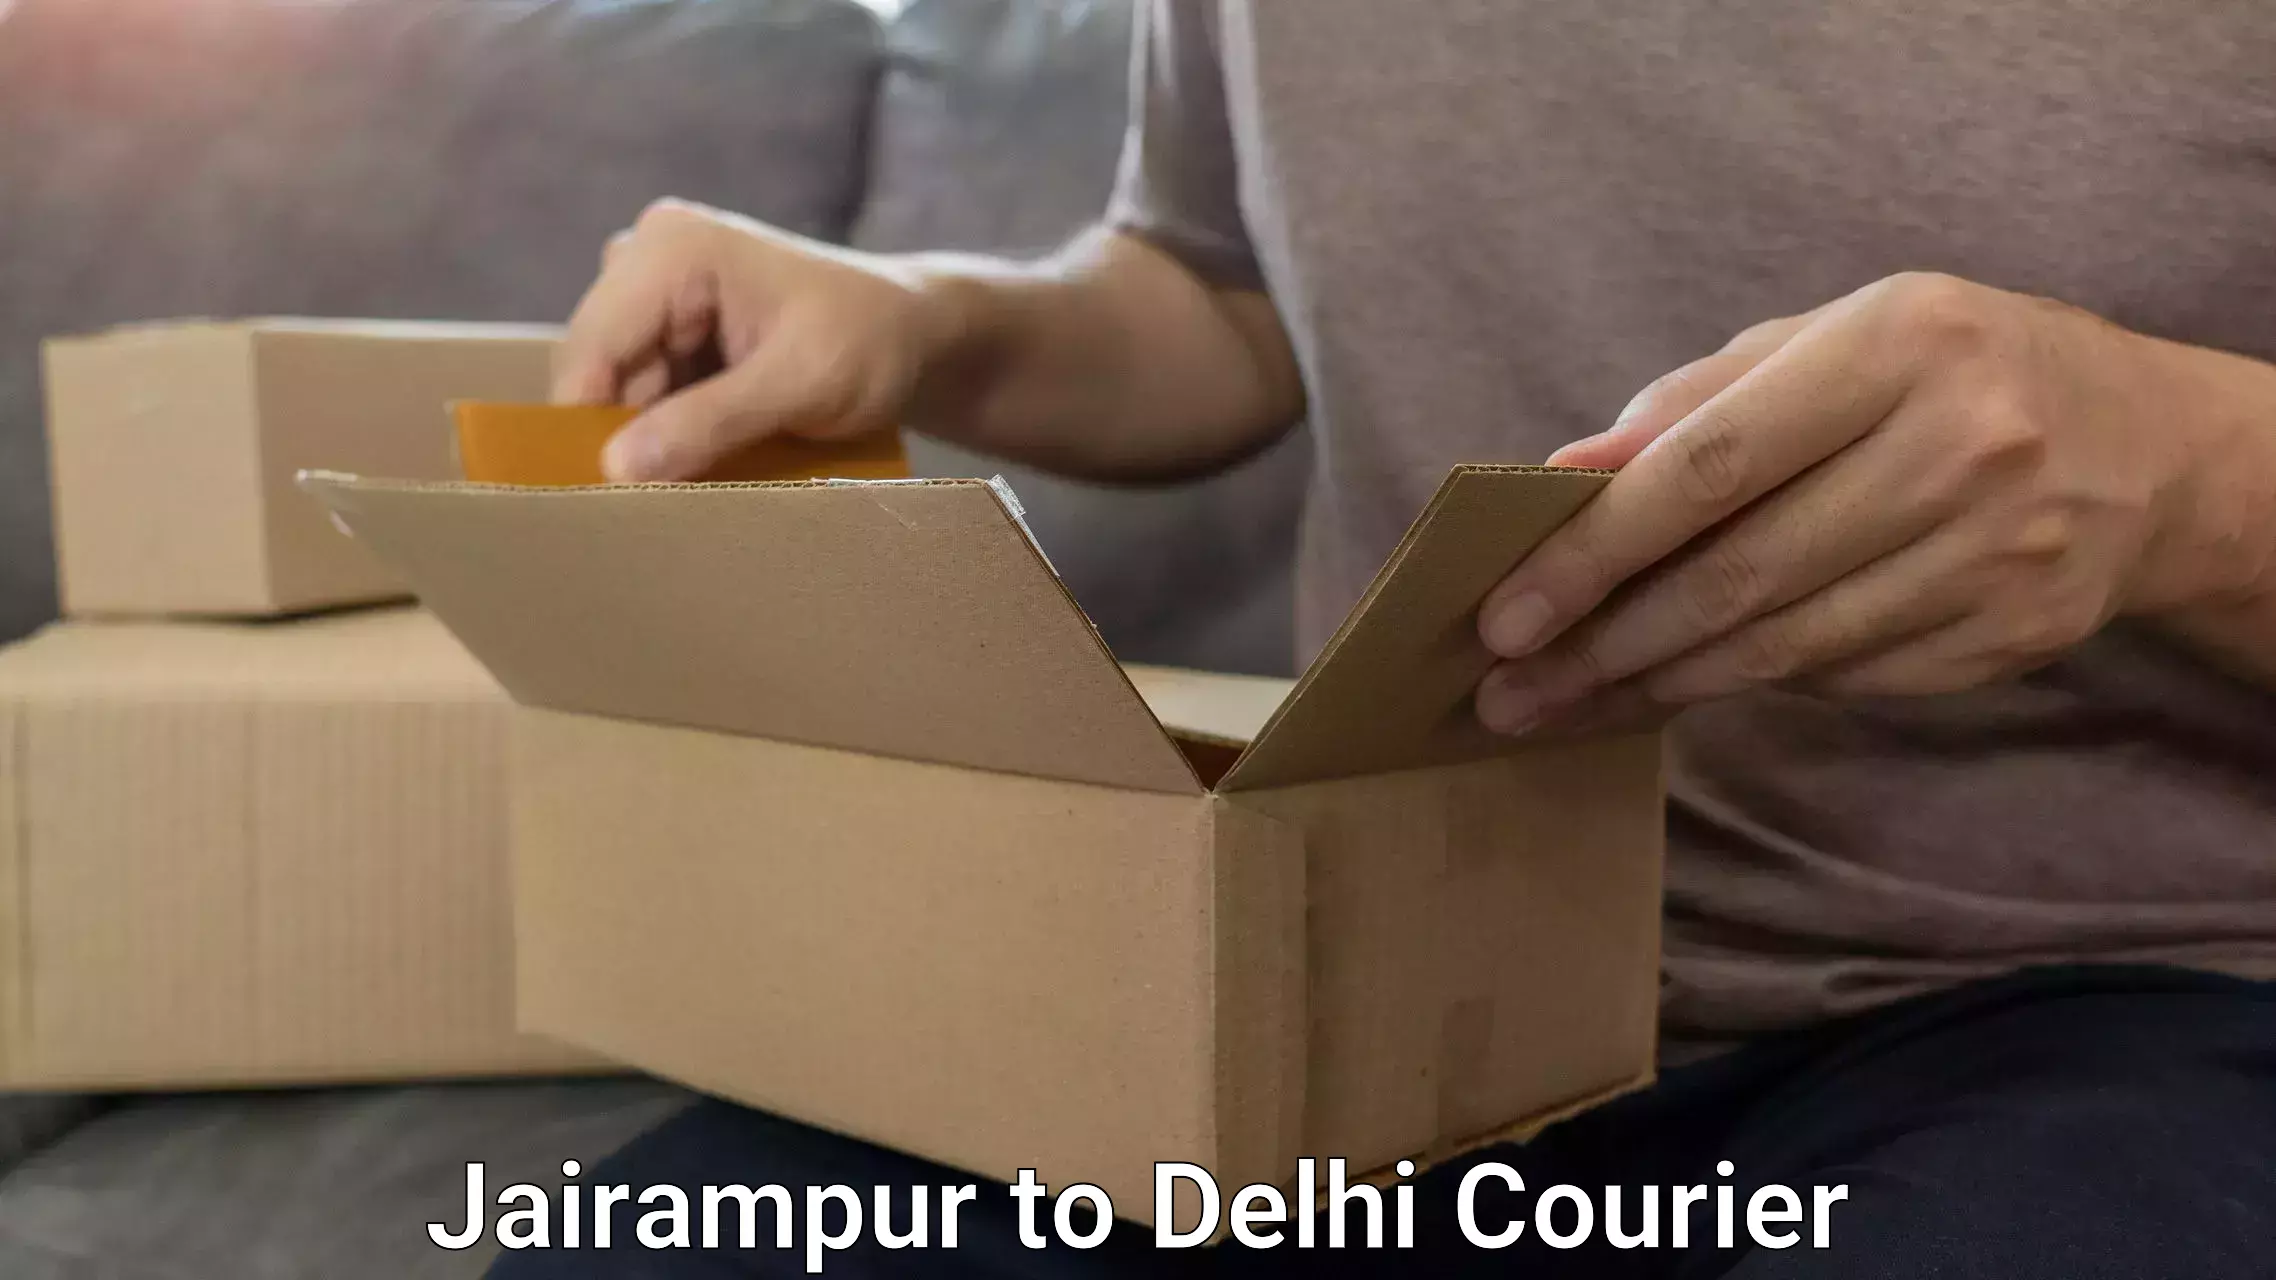 Personal effects shipping Jairampur to East Delhi